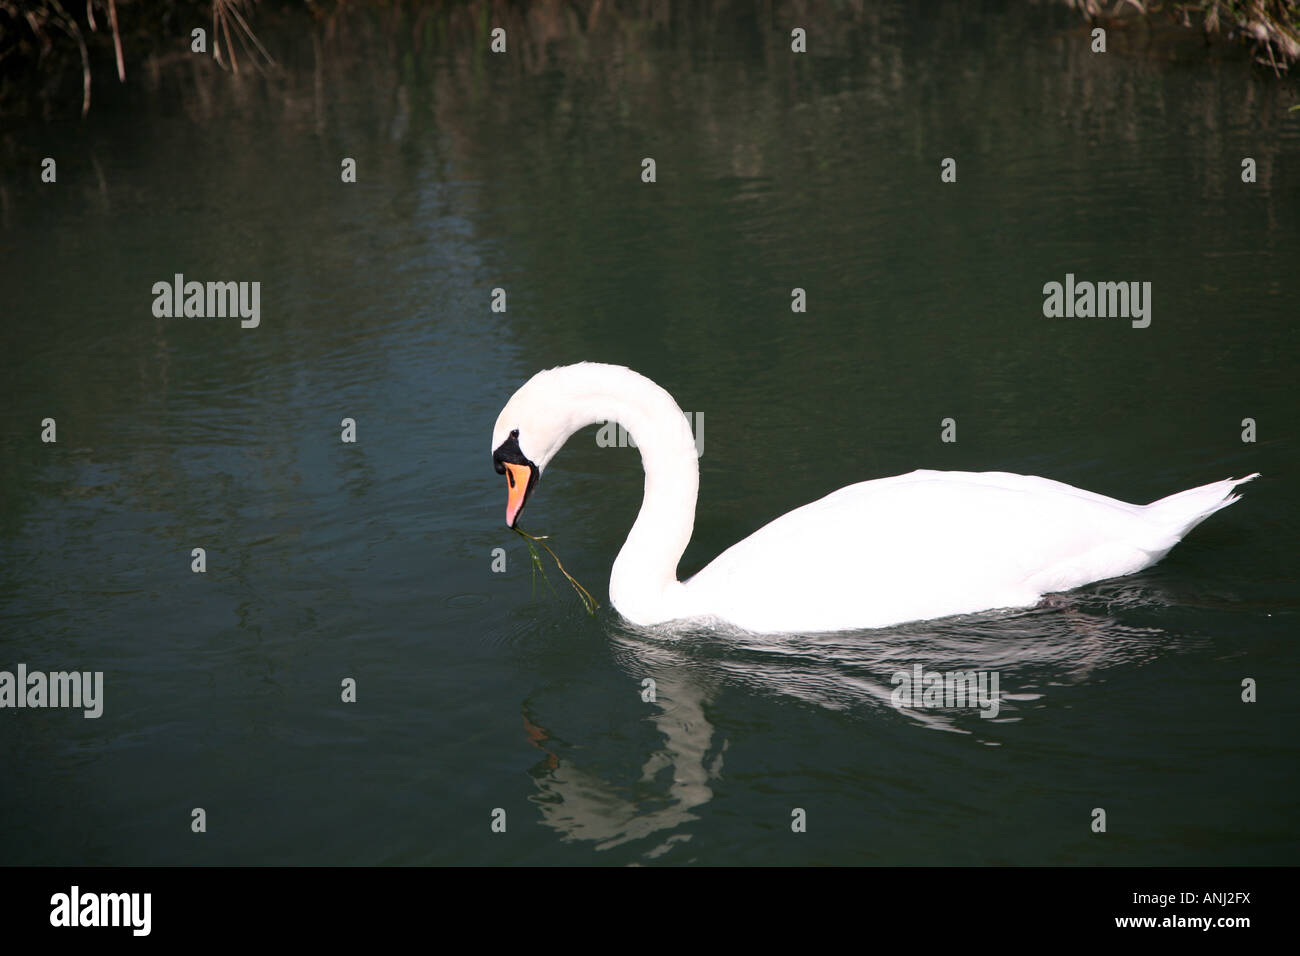 Swan swimming on river eating plant Stock Photo